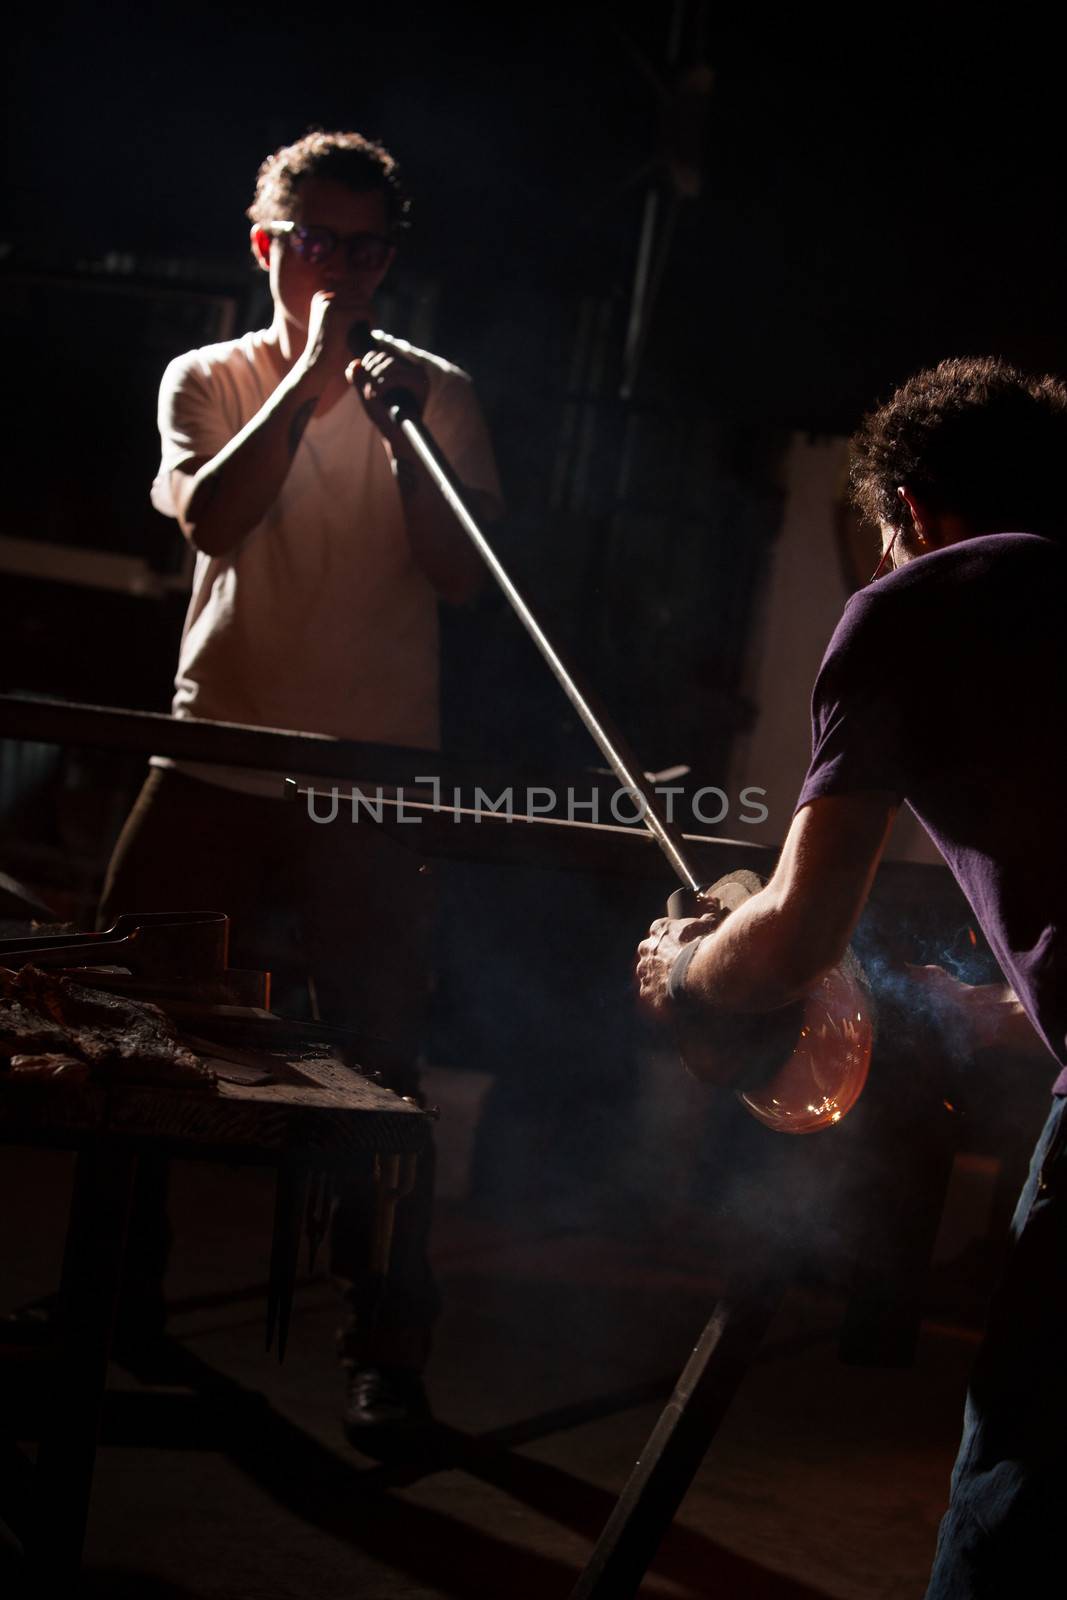 Two glass artists using blowpipe to create glass object